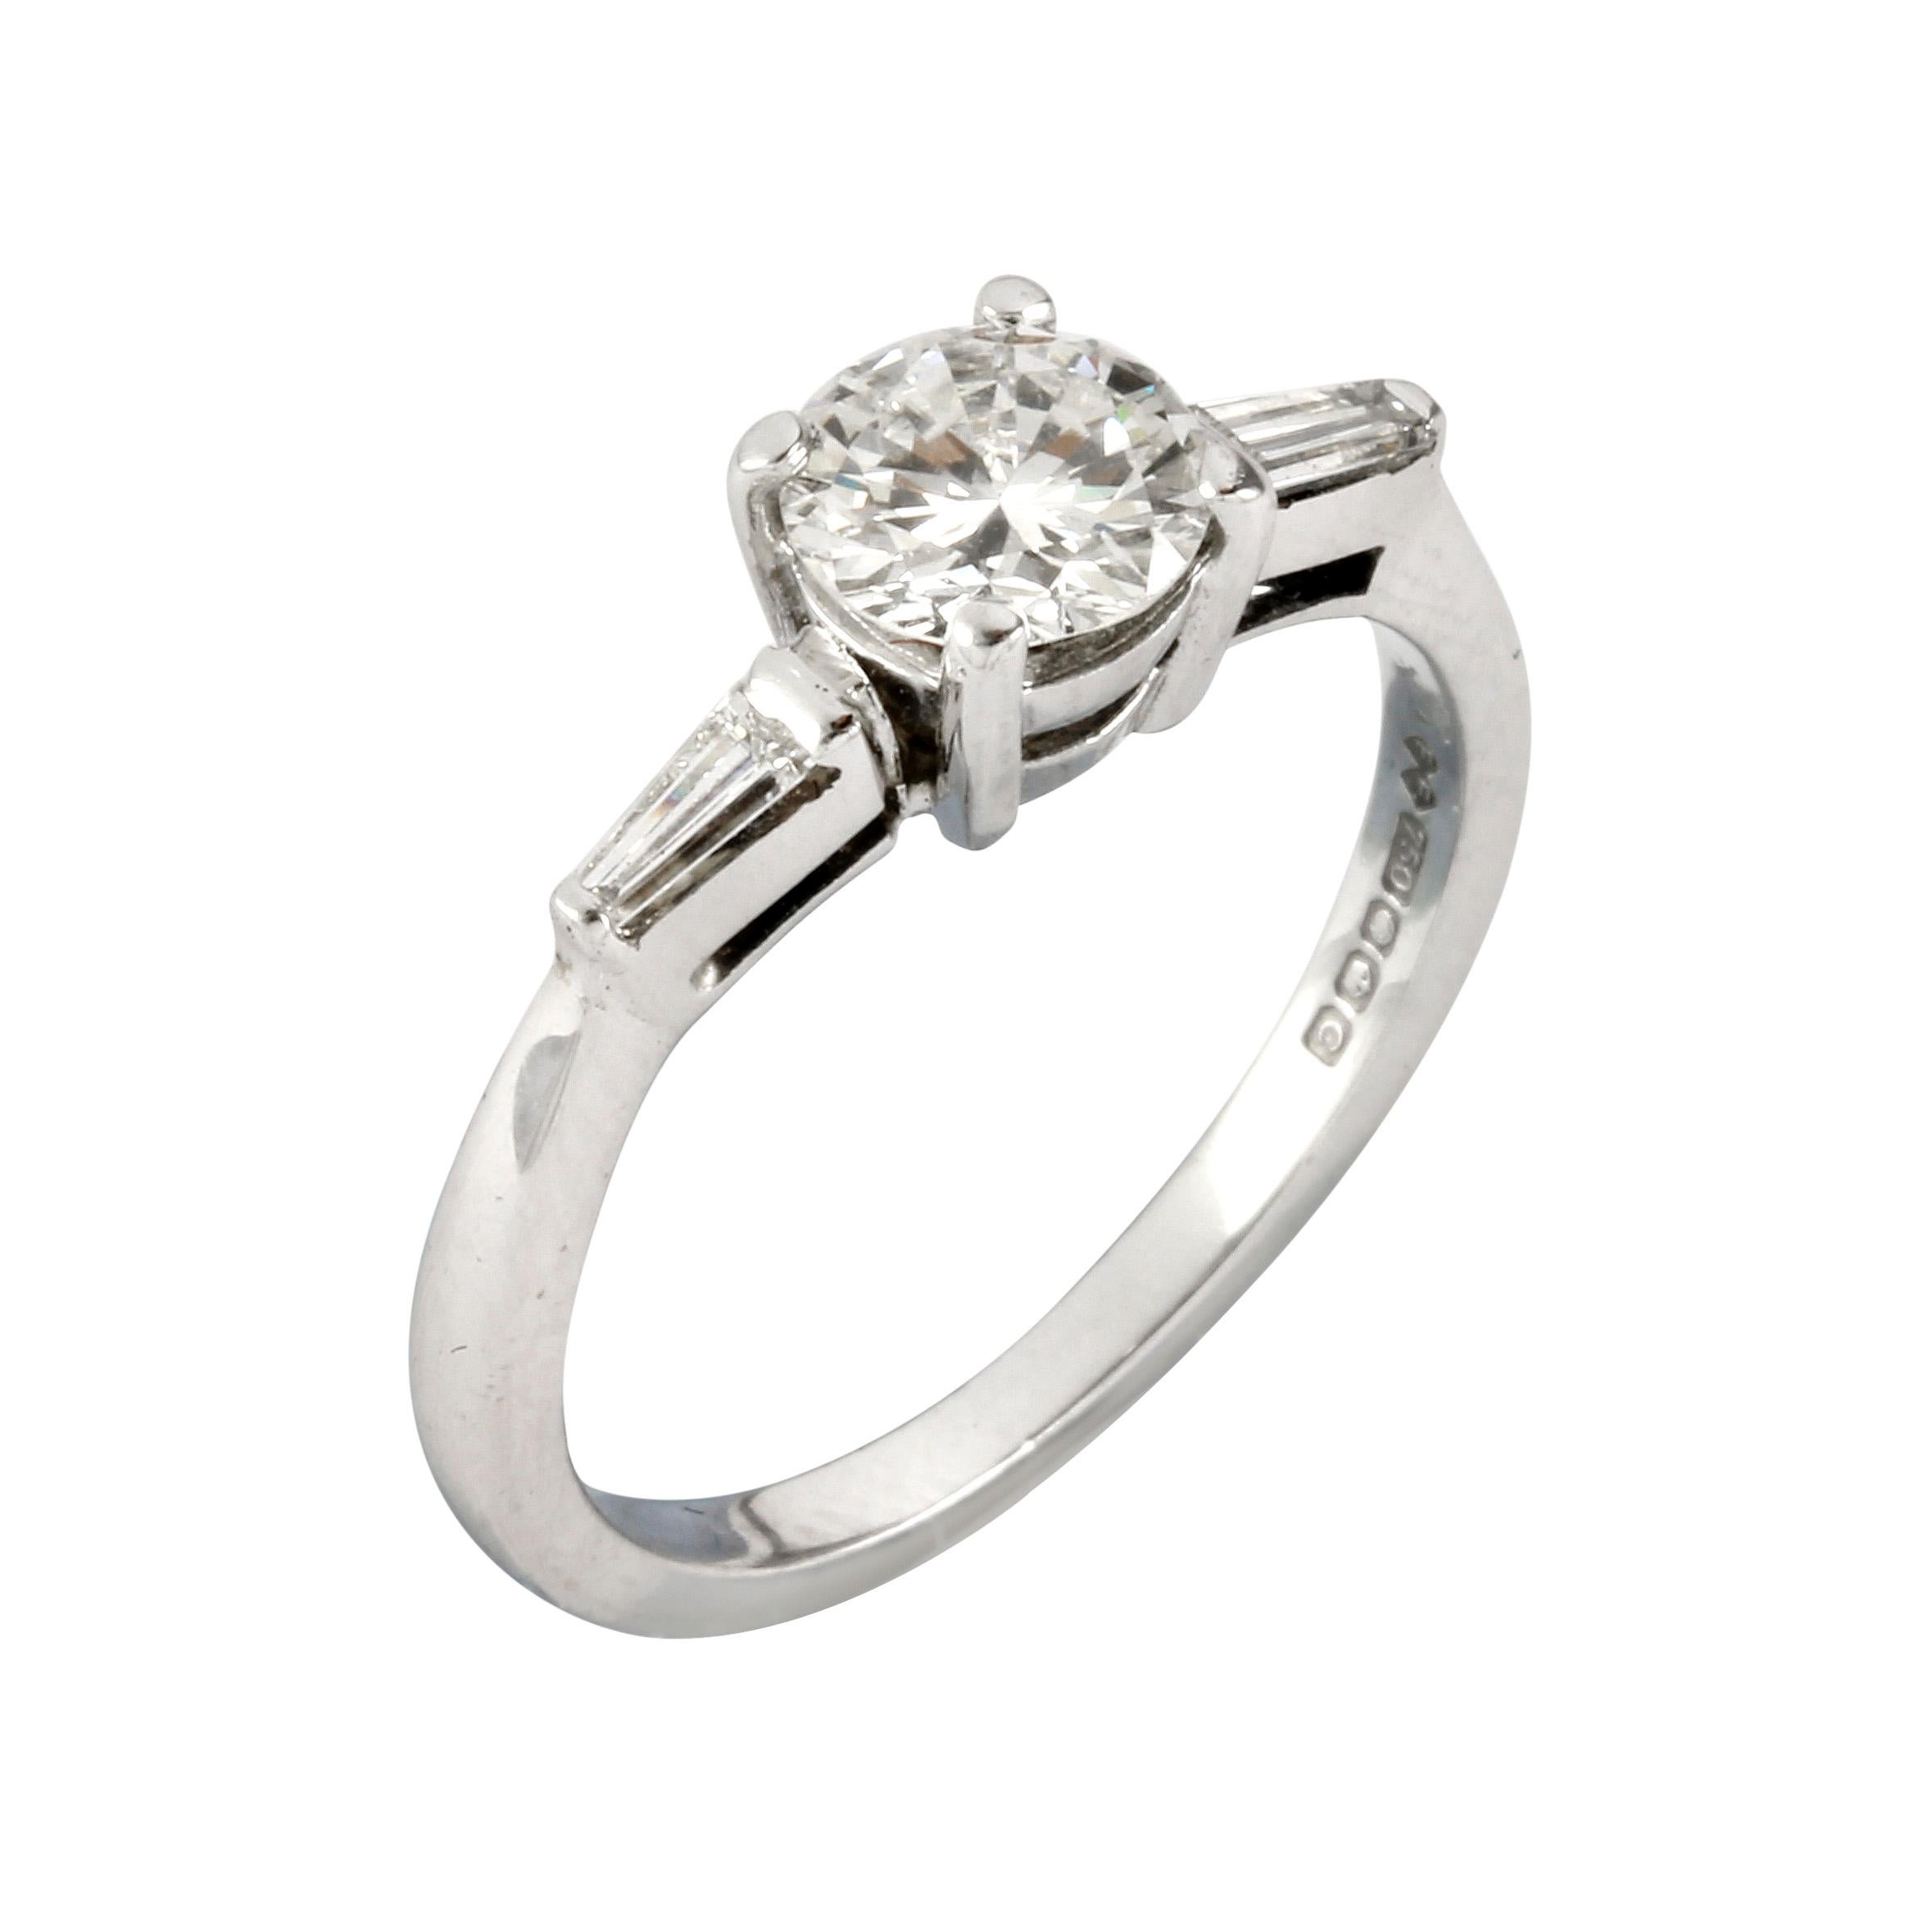 A single stone diamond ring, the round brilliant-cut diamond weighting 0.67carats, of H colour and SI1 clarity, accompanied by De Beers Grading Report, to a four claw setting with tapered baguette-cut diamond set to each shoulder, hallmarked 18ct